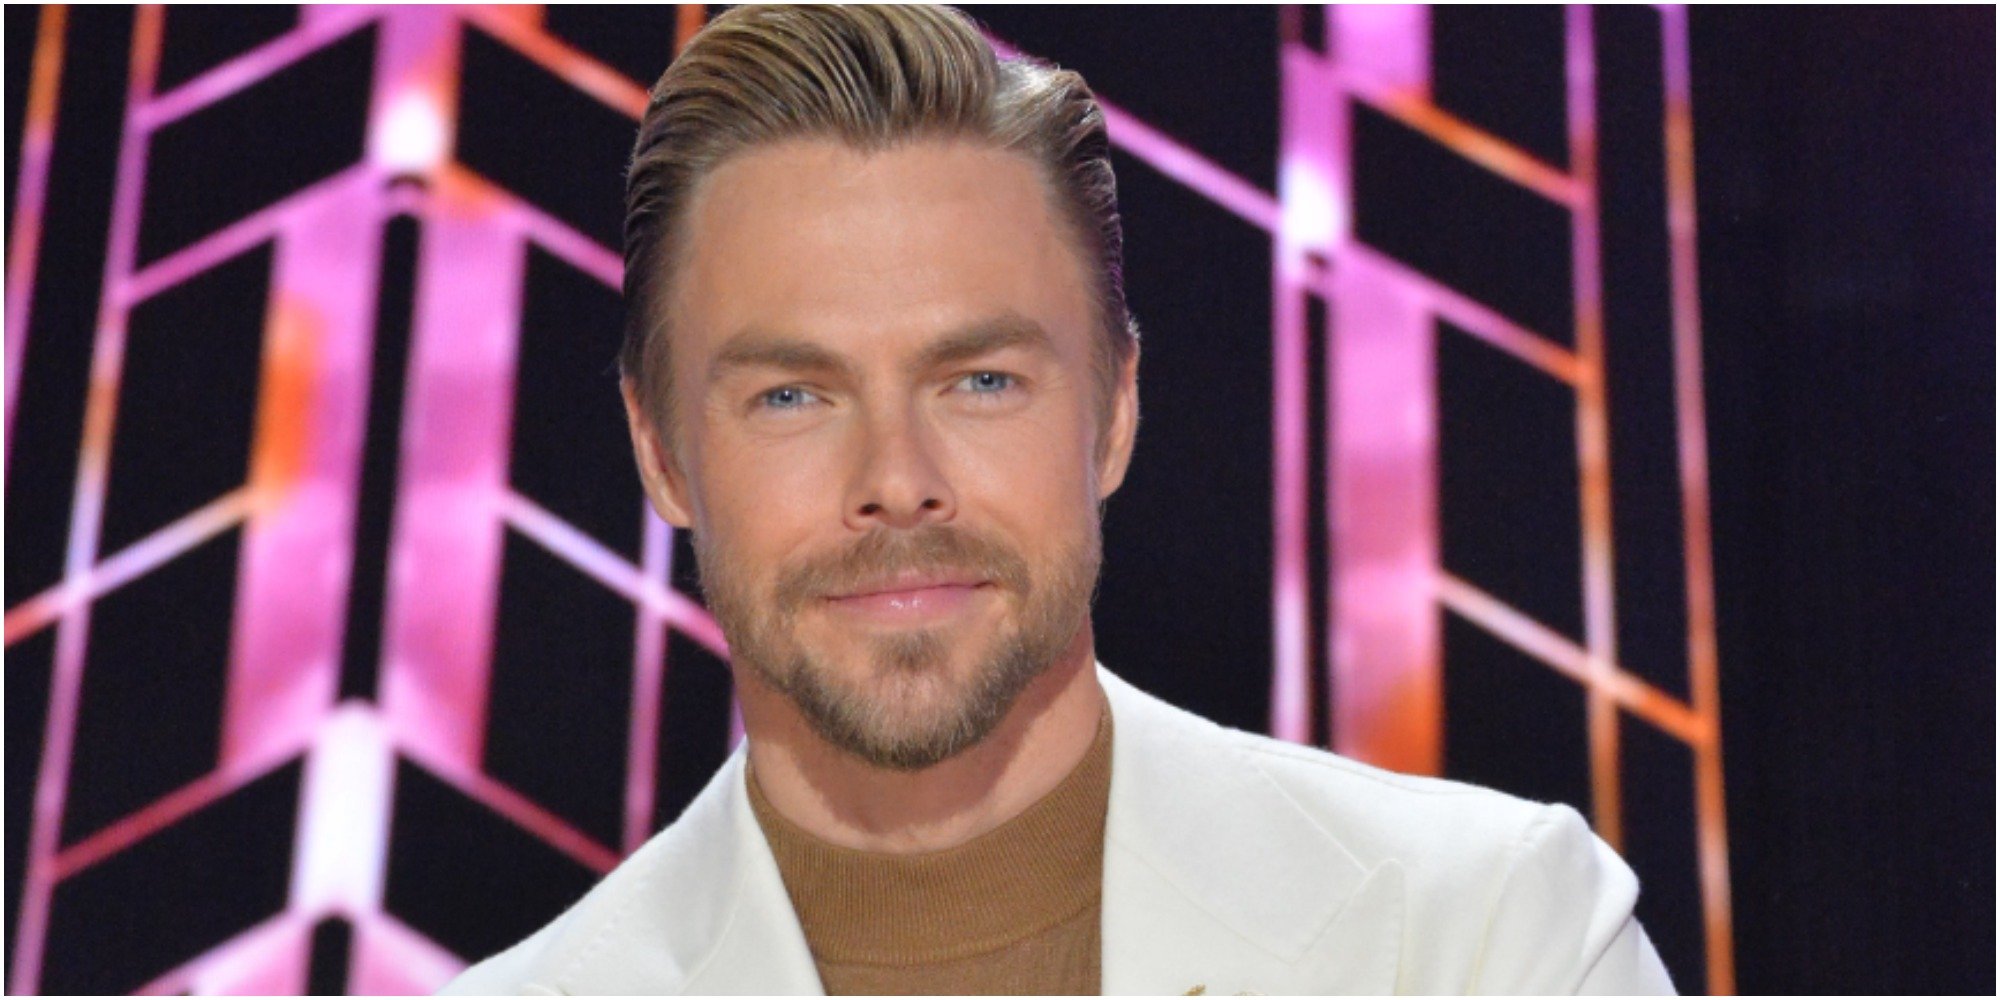 Derek Hough on the set of Dancing With the Stars.